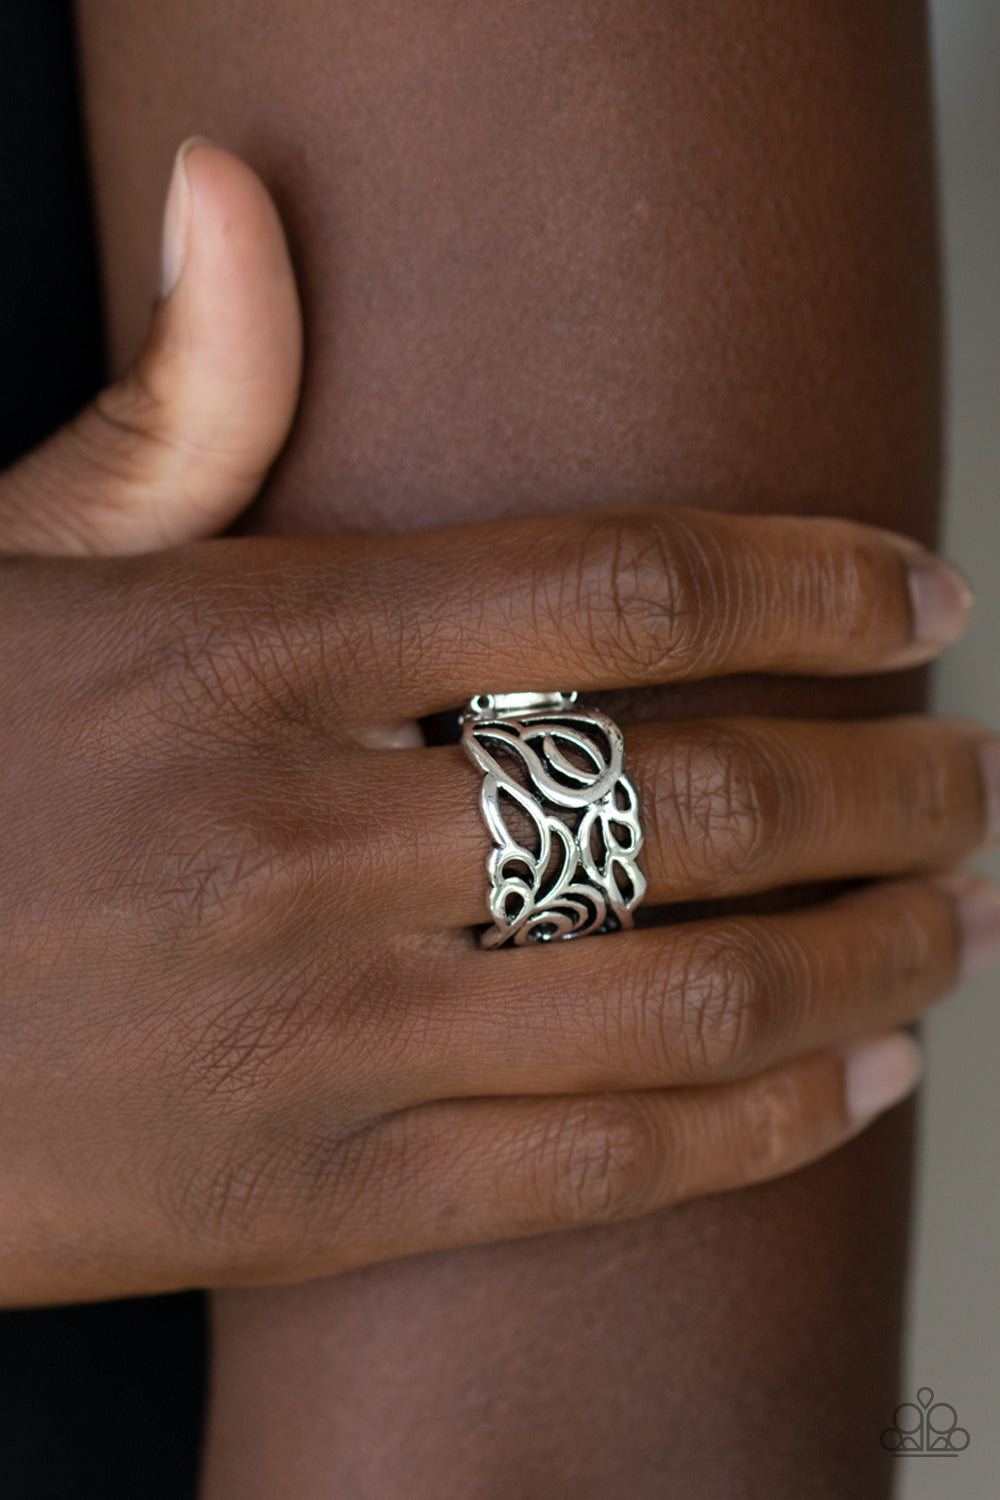 Paparazzi Rings - Ivy Leaguer - Silver